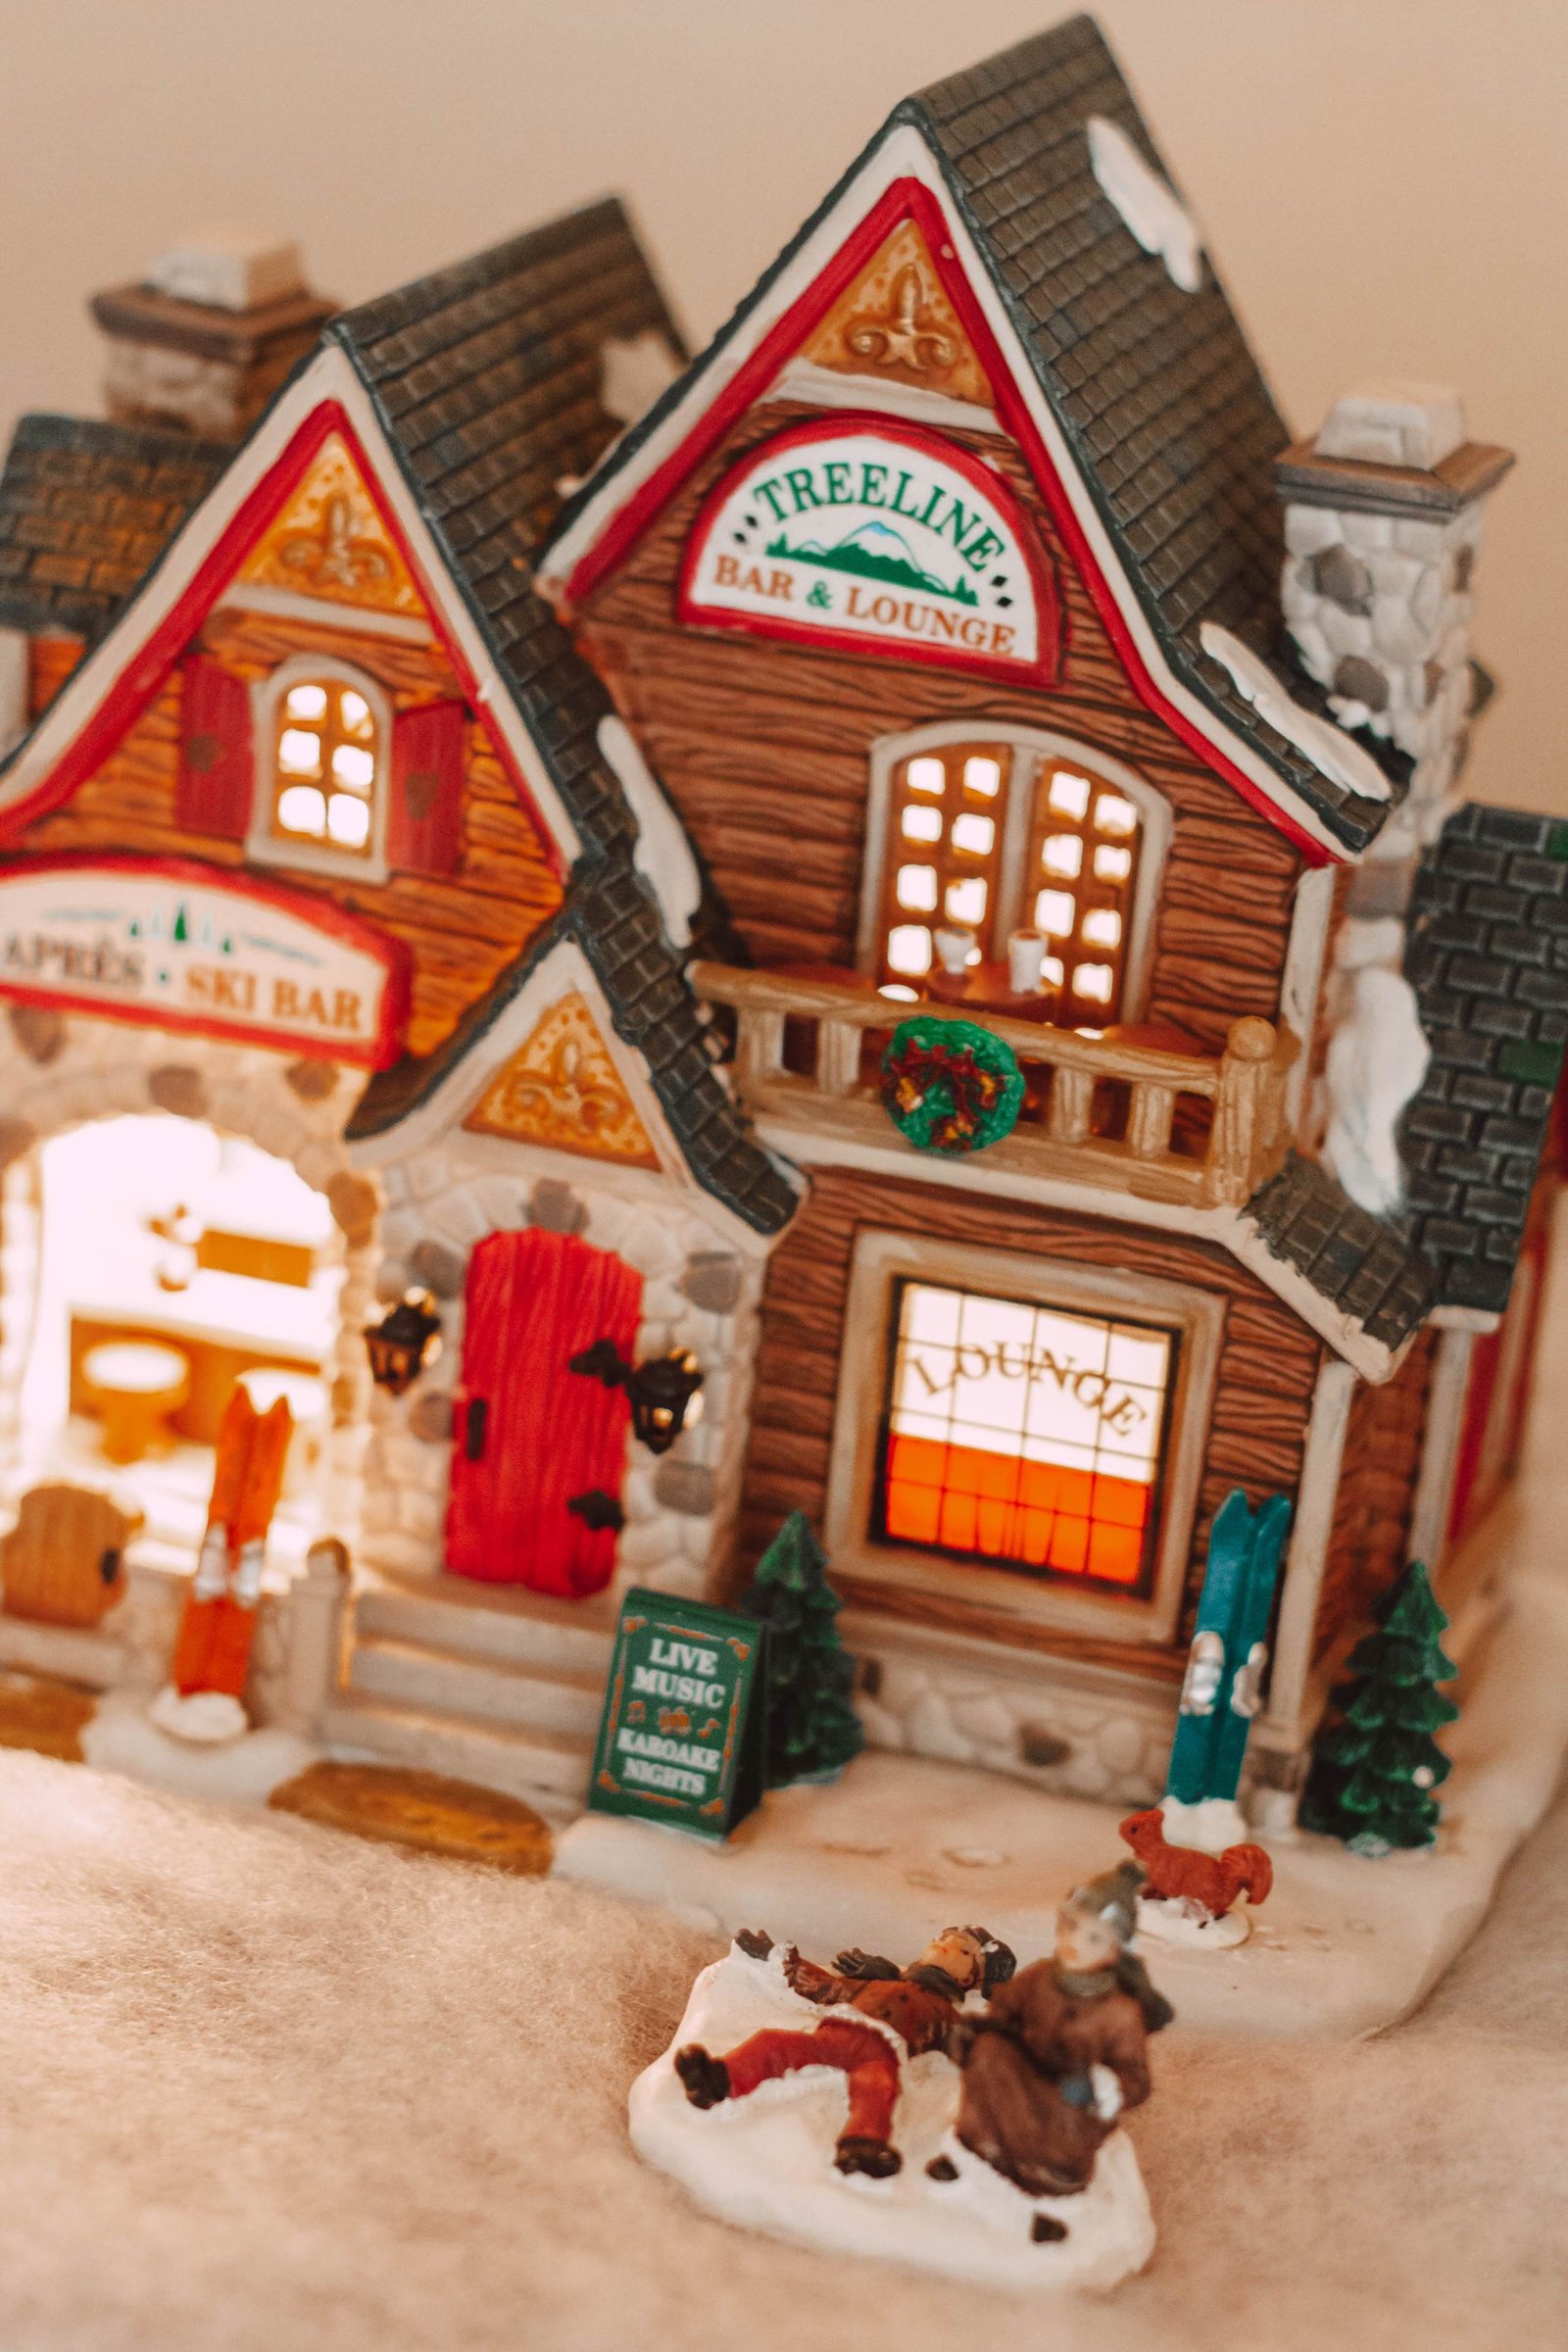 How to Decorate Your Home with a Holiday Village by The Espresso Edition cozy book and lifestyle blog